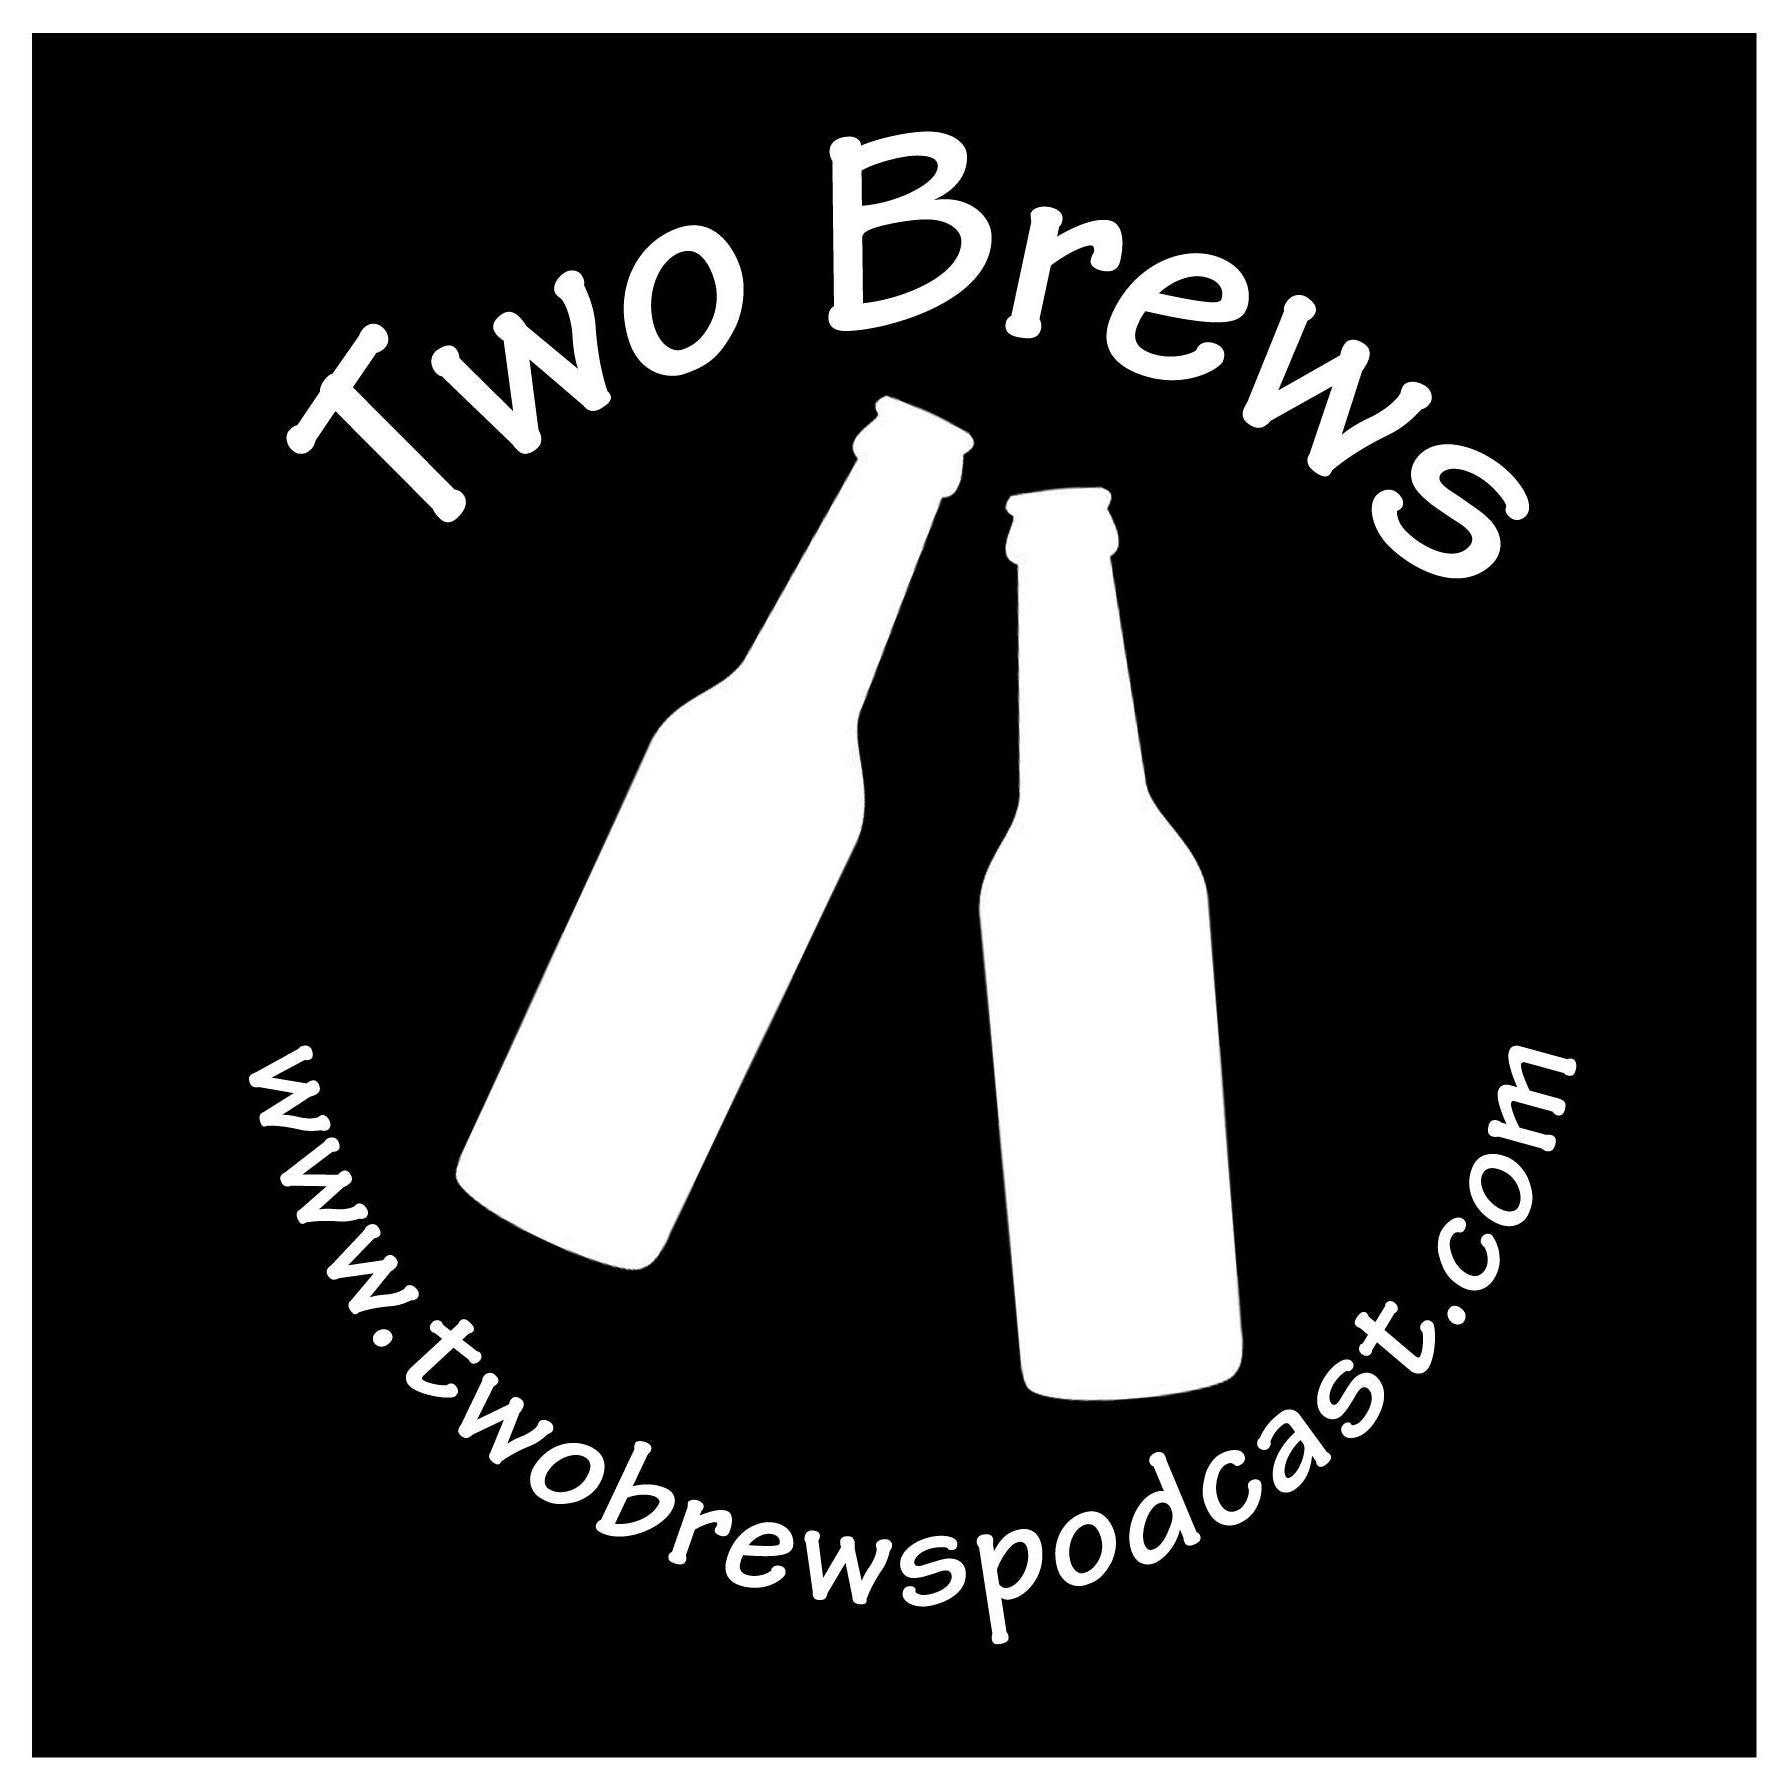 Two Brews is a craft beer media outlet. Originally created by Matt Gadouas and Kris Jarrett, we report on craft beer news wherever we happen to be!